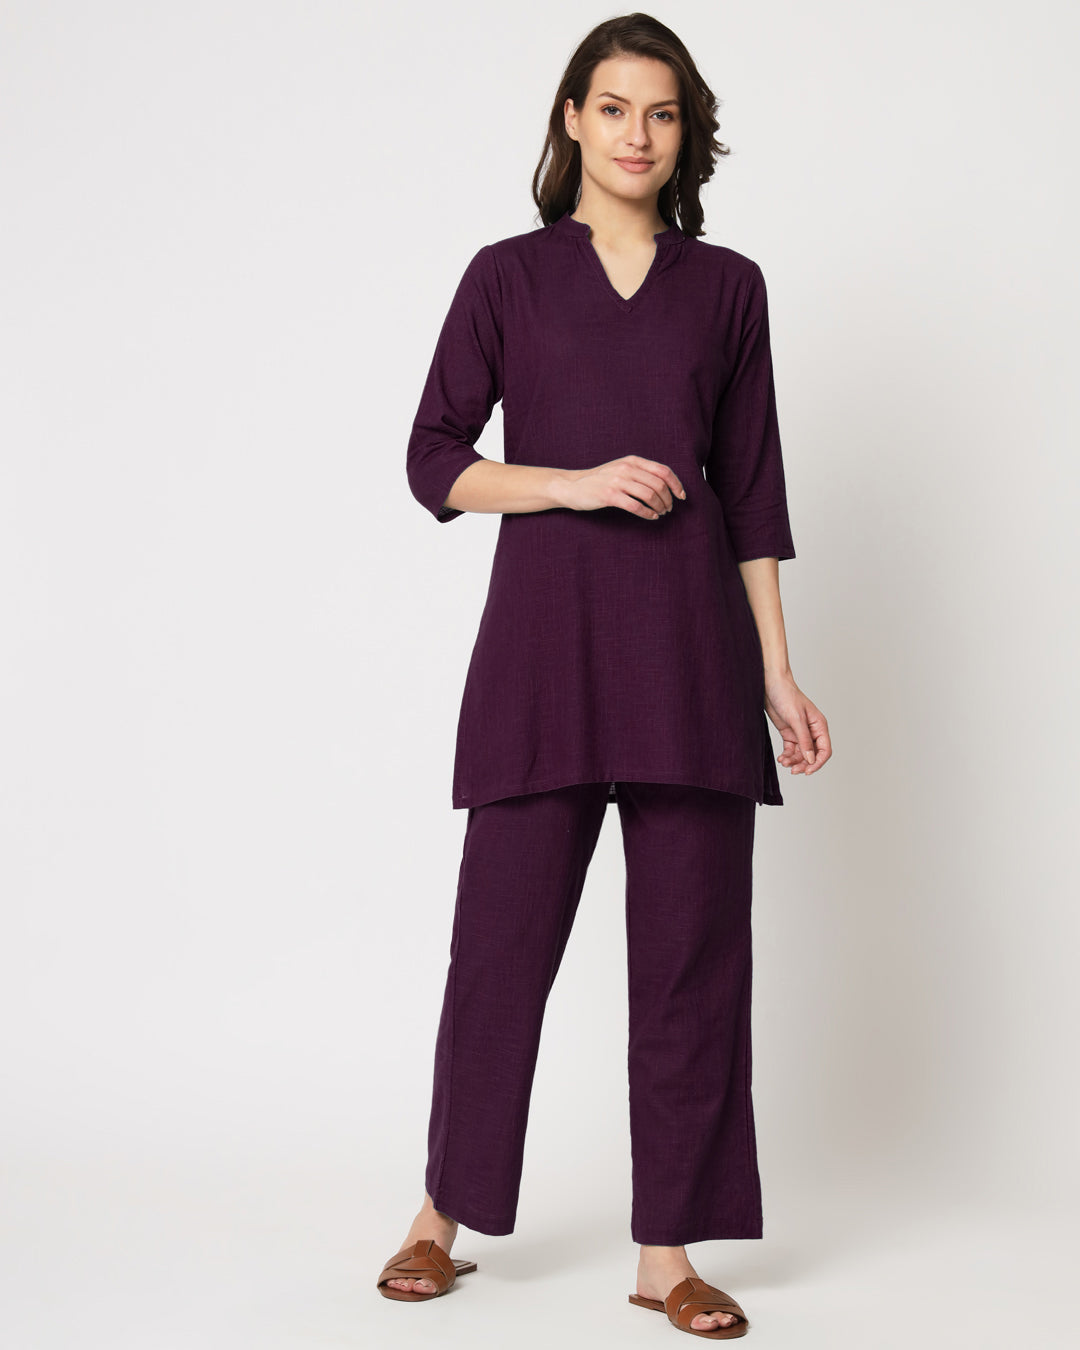 Plum Passion Collar Neck Mid Length Solid Co-ord Set